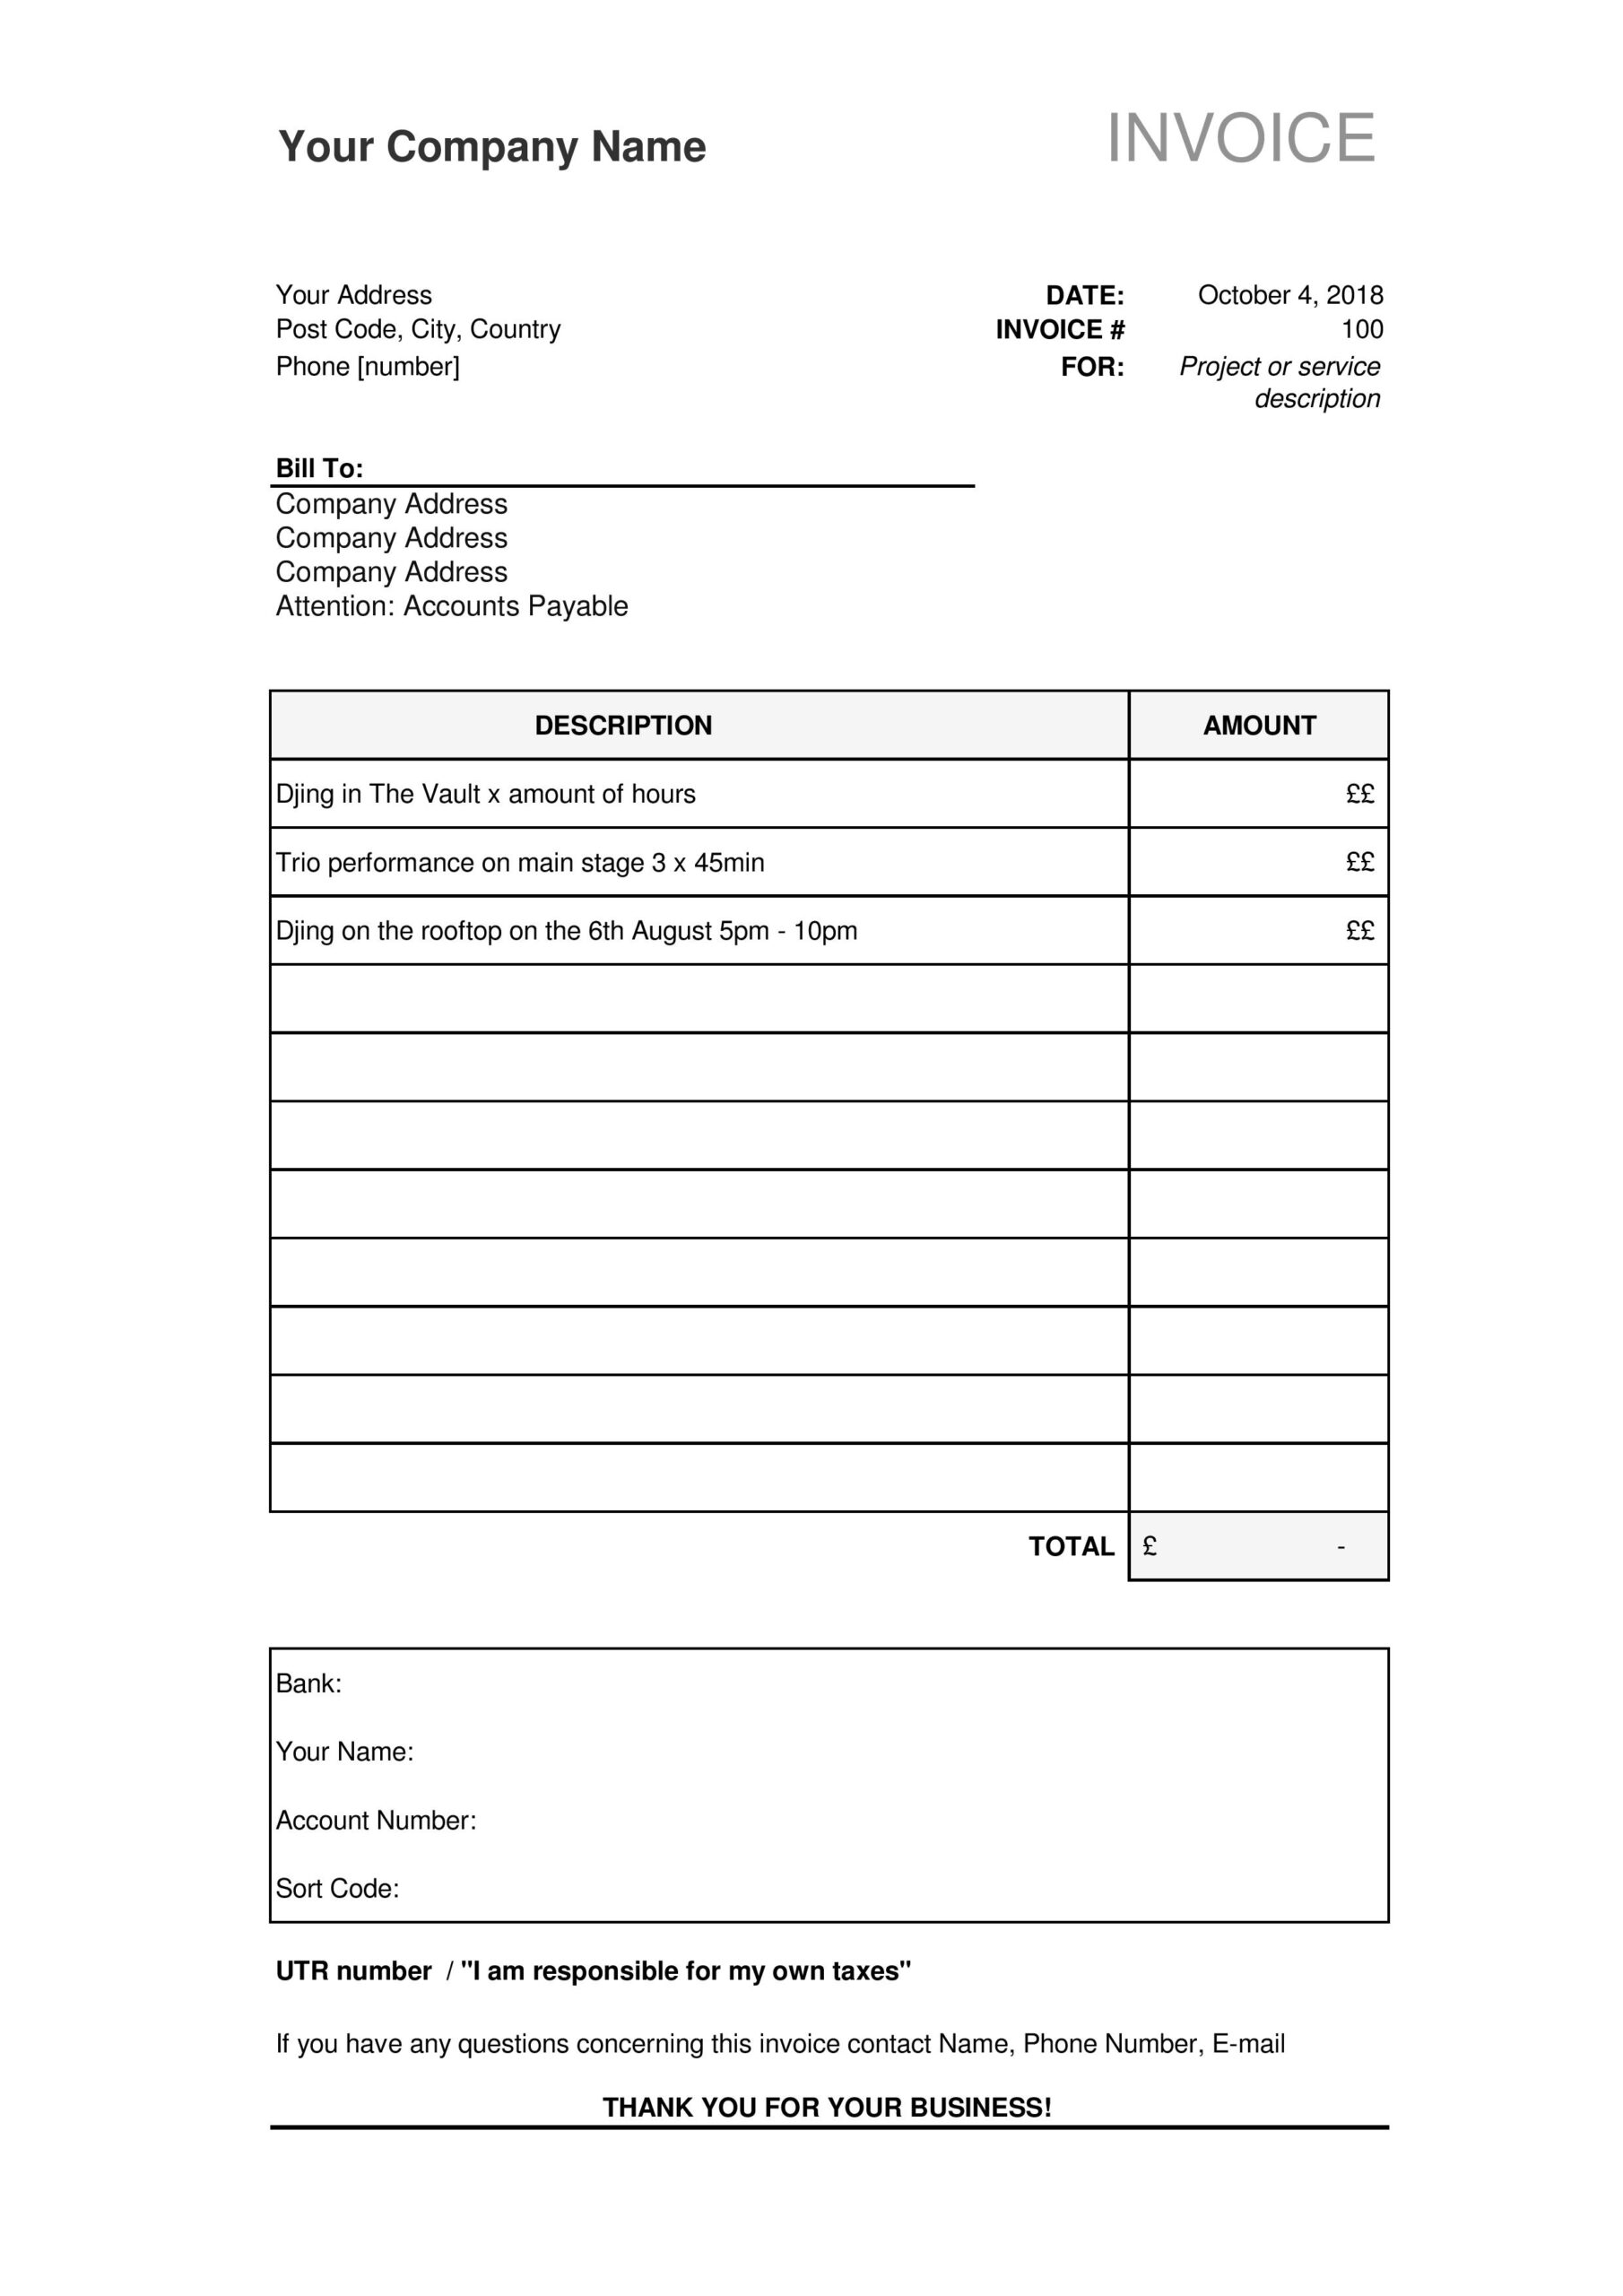 Quick Guide On Invoicing – Soundgirls In Invoice Template For Dj Services